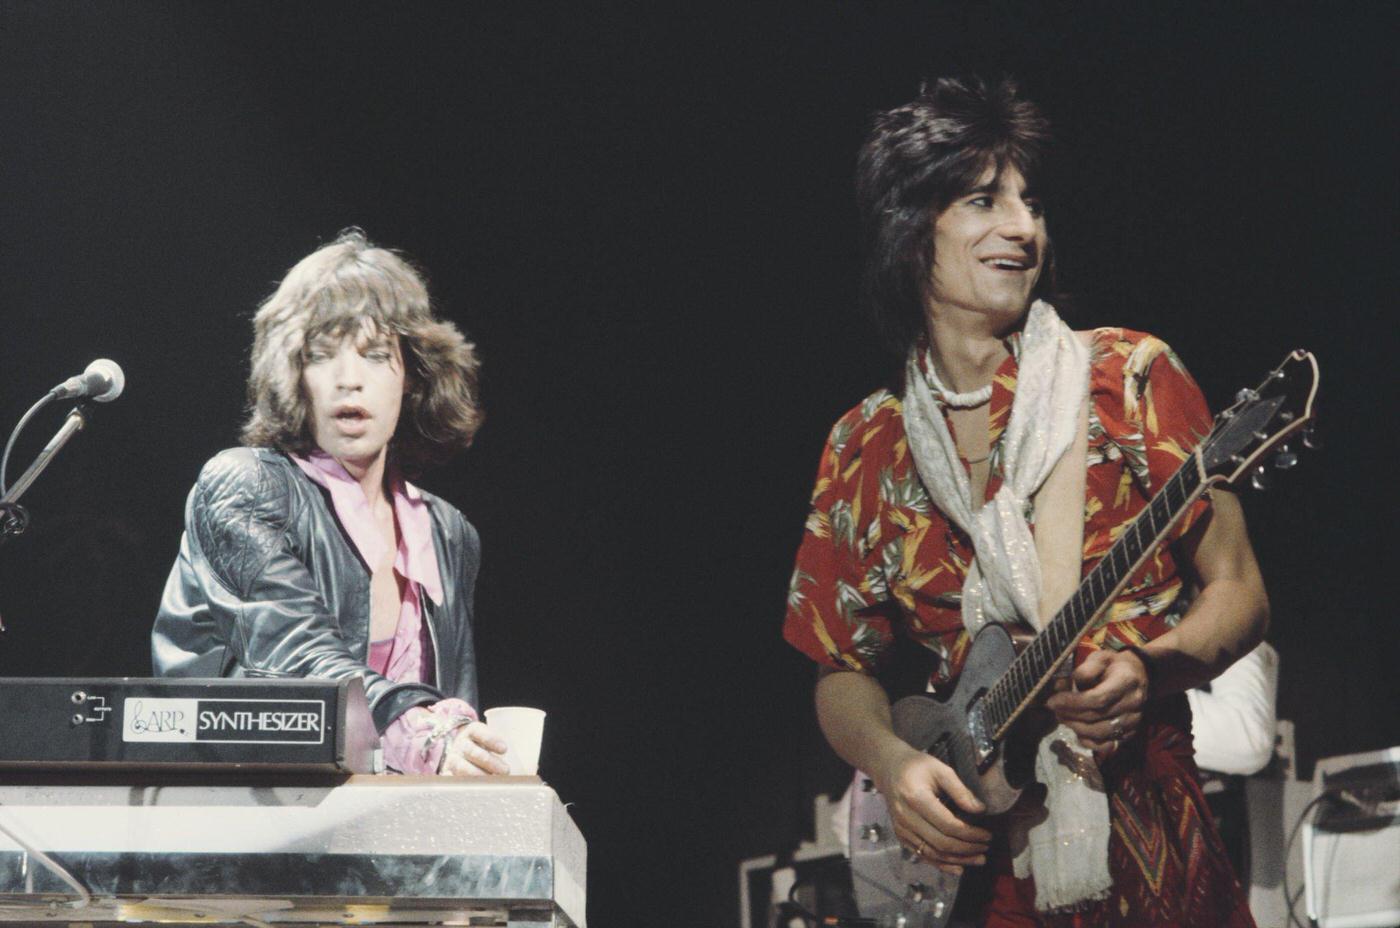 Mick Jagger and Ronnie Wood perform on stage during the tour, June 1975.